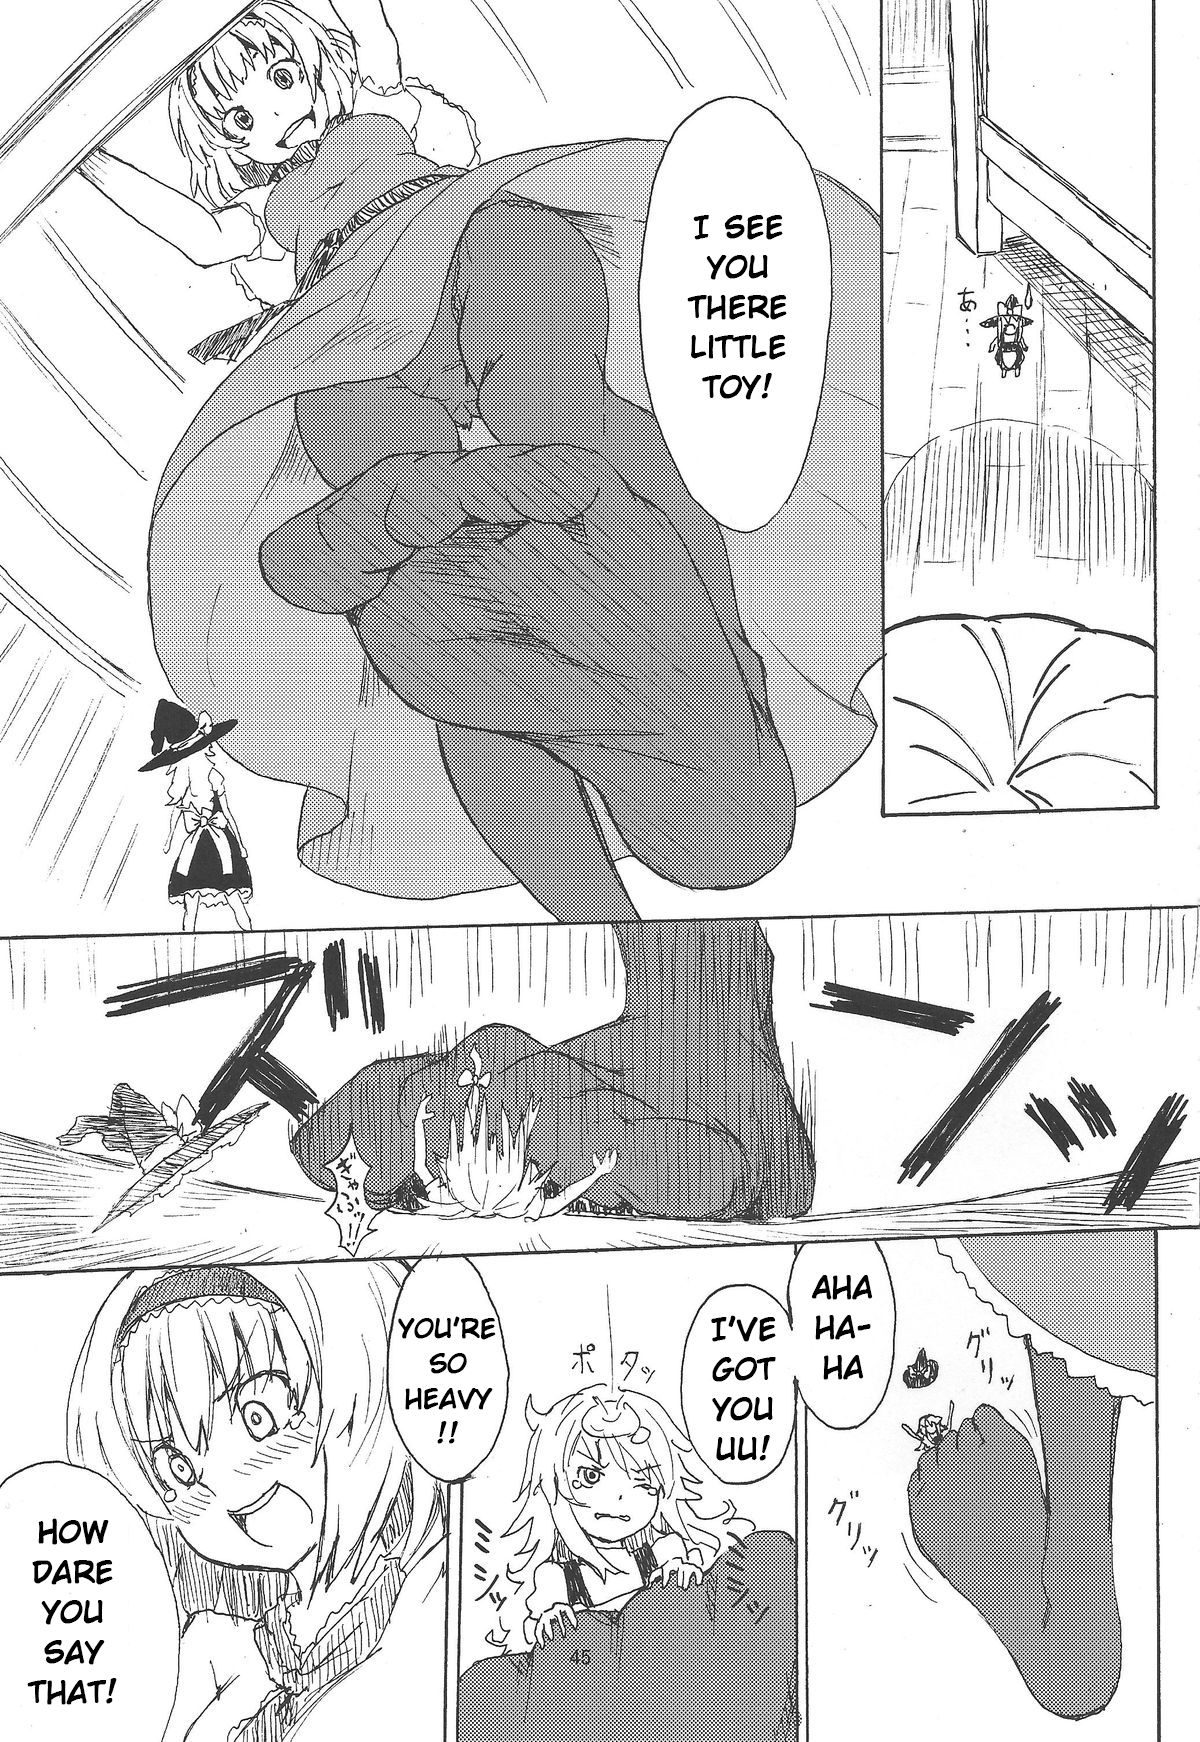 (C87) [106m (Various)] Omae ga Chiisaku Naare! | You are getting smaller! (Touhou Project) [English] [Jinsai] [Incomplete] page 13 full